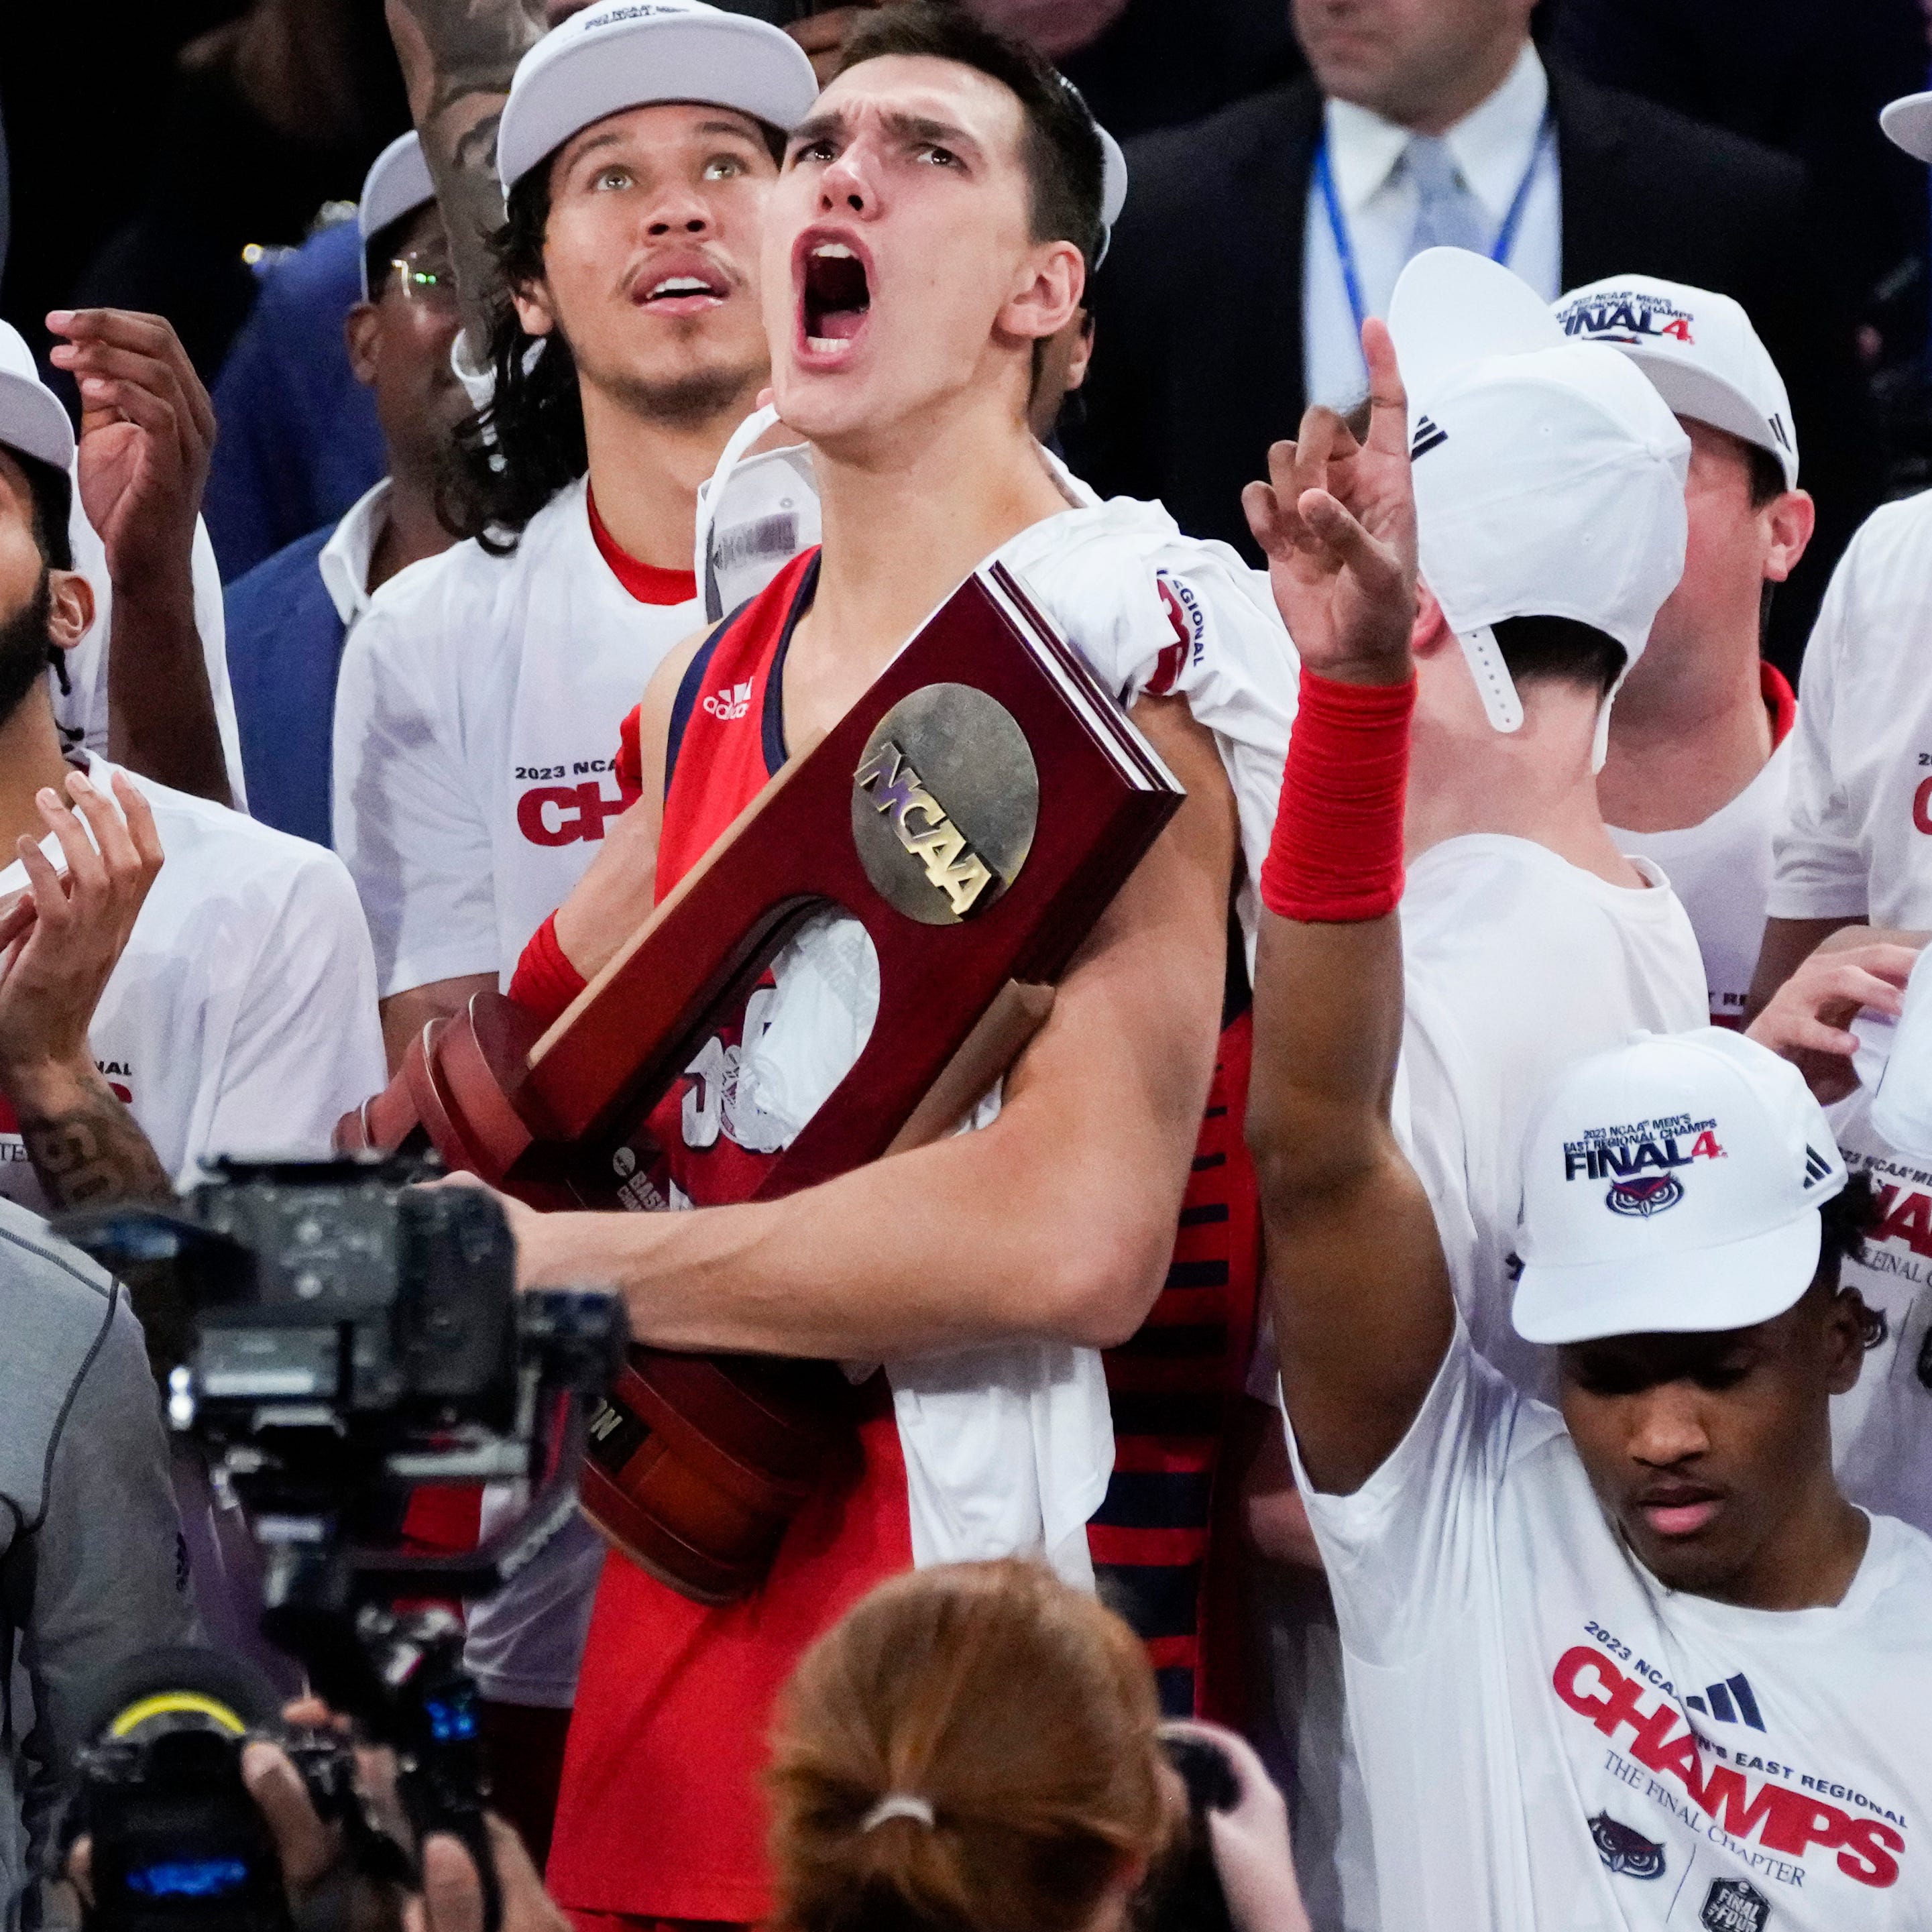 Florida Atlantic center Vladislav Goldin, center, celebrates after the Owls defeated Kansas State in the East Regional final of the NCAA men's tournament. at Madison Square Garden.